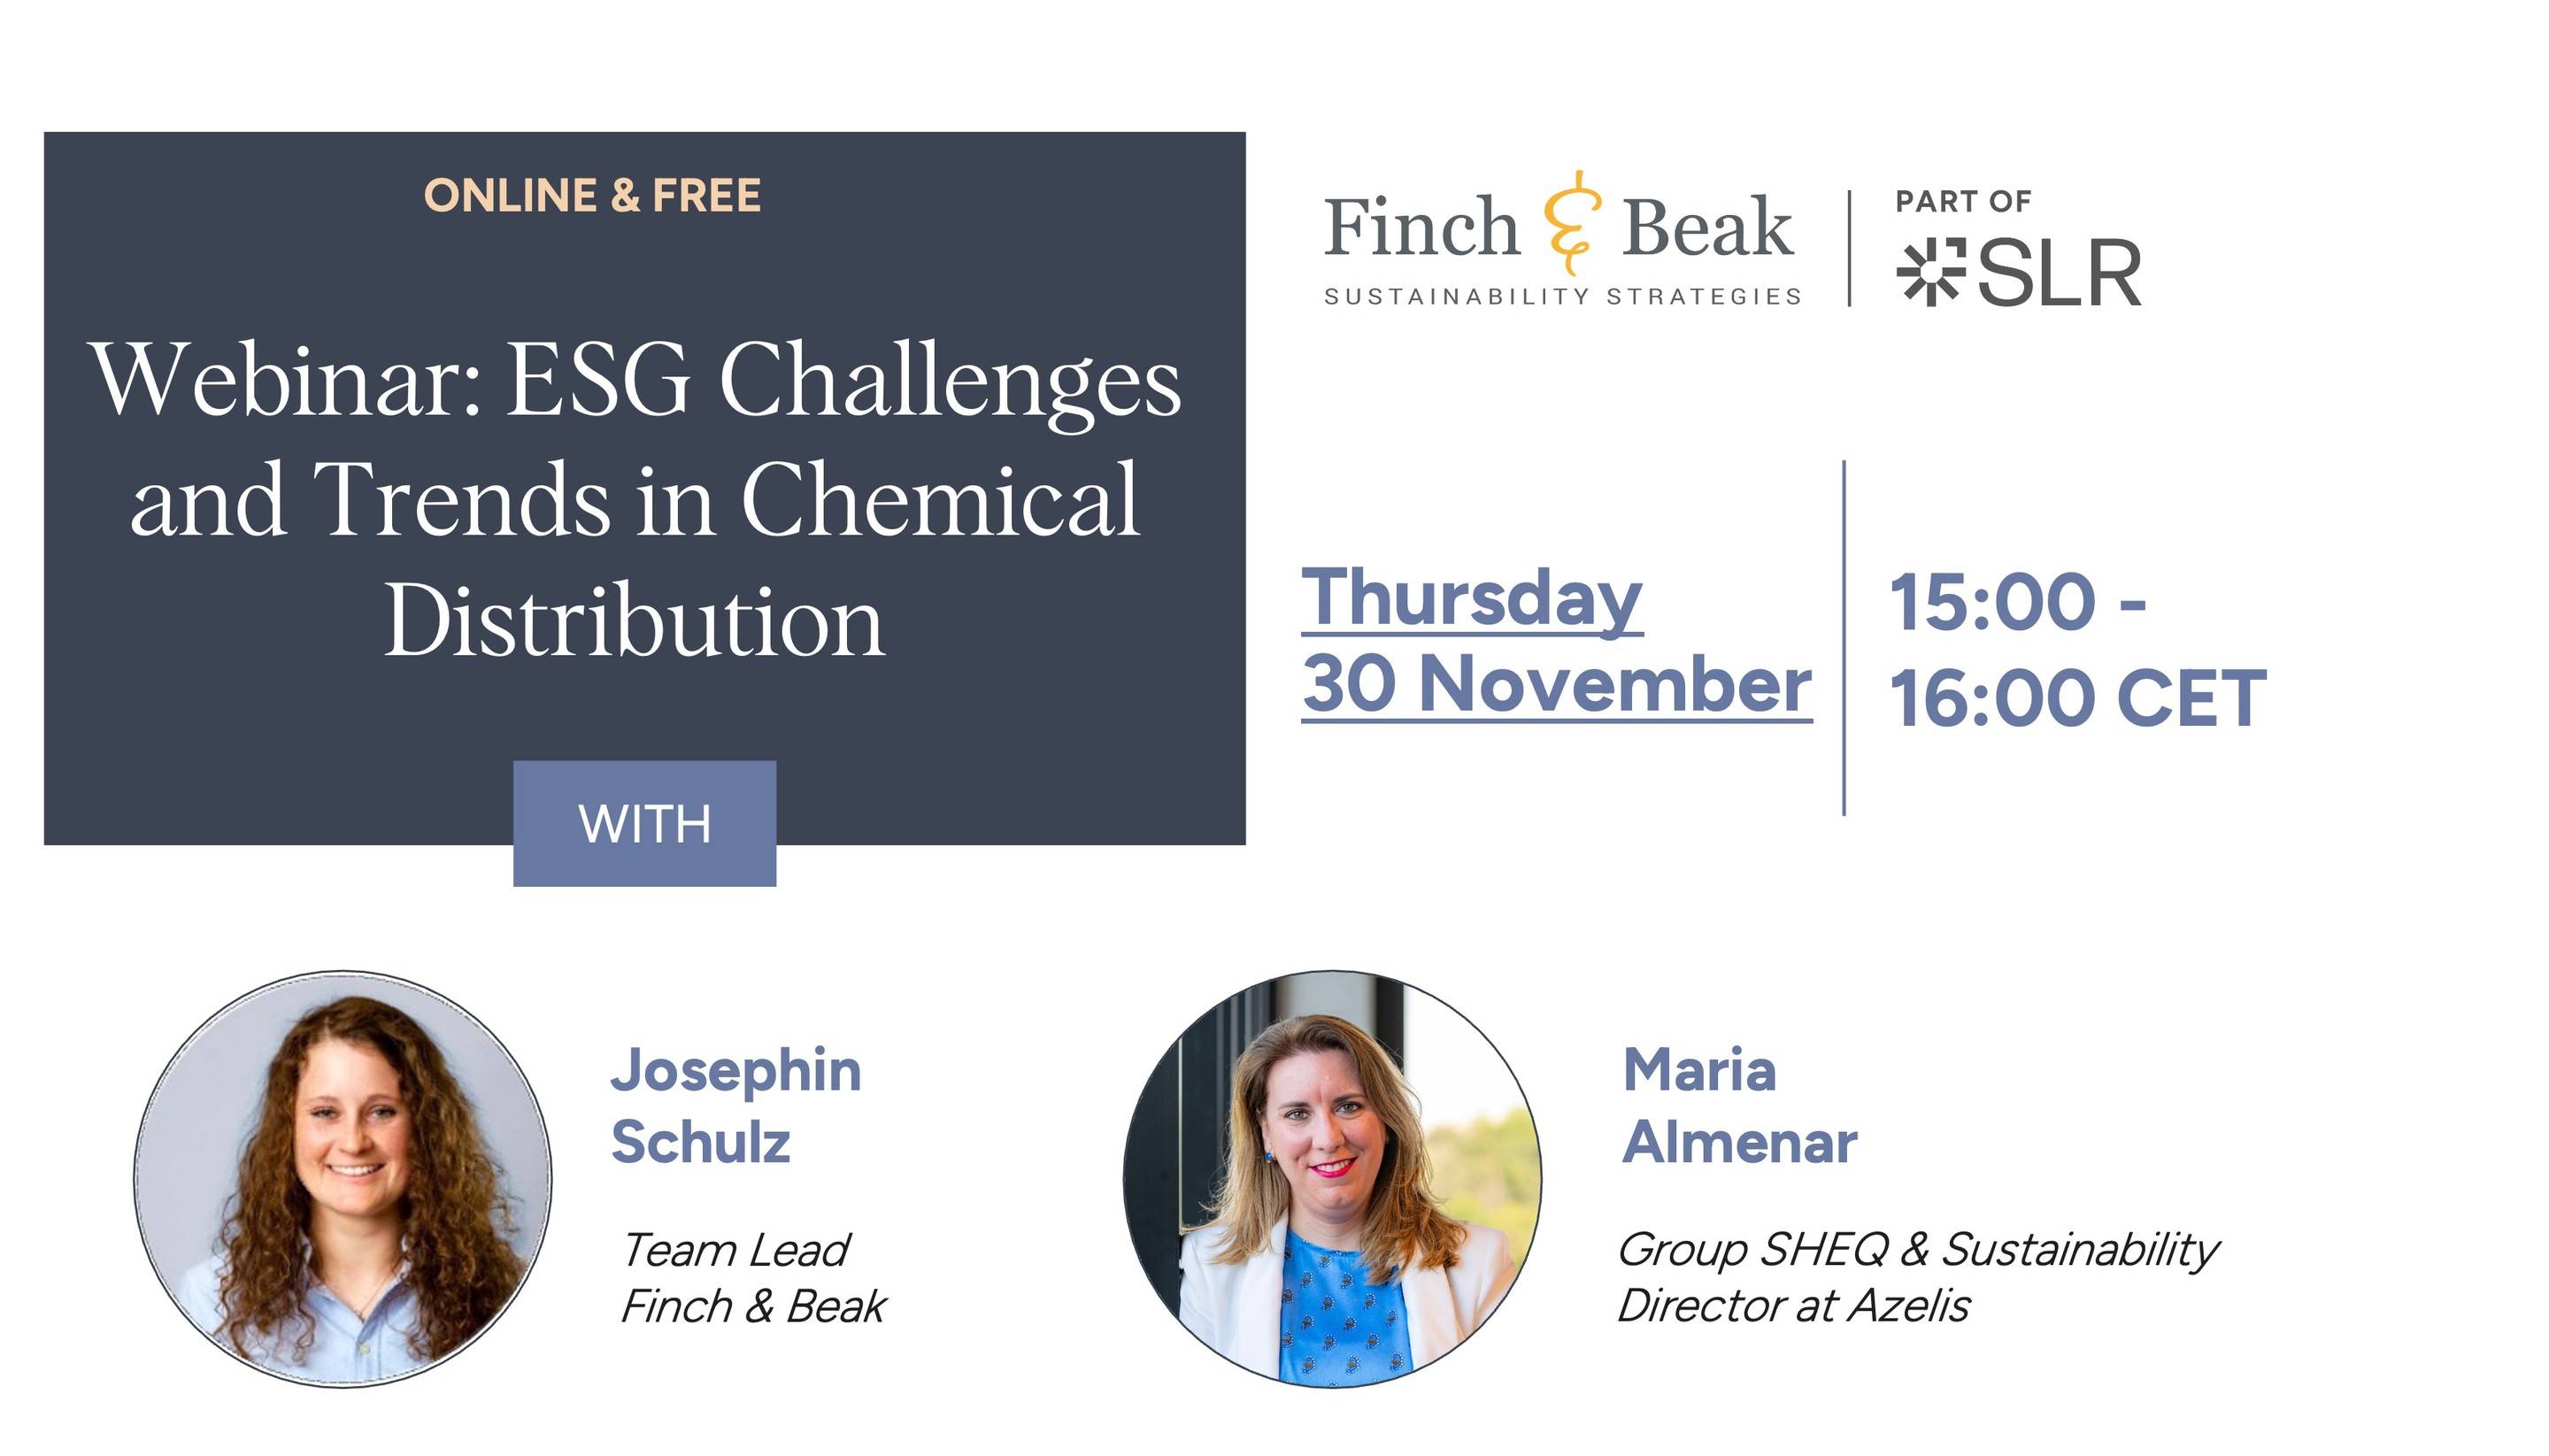 Webinar: ESG Challenges and Trends in Chemical Distribution